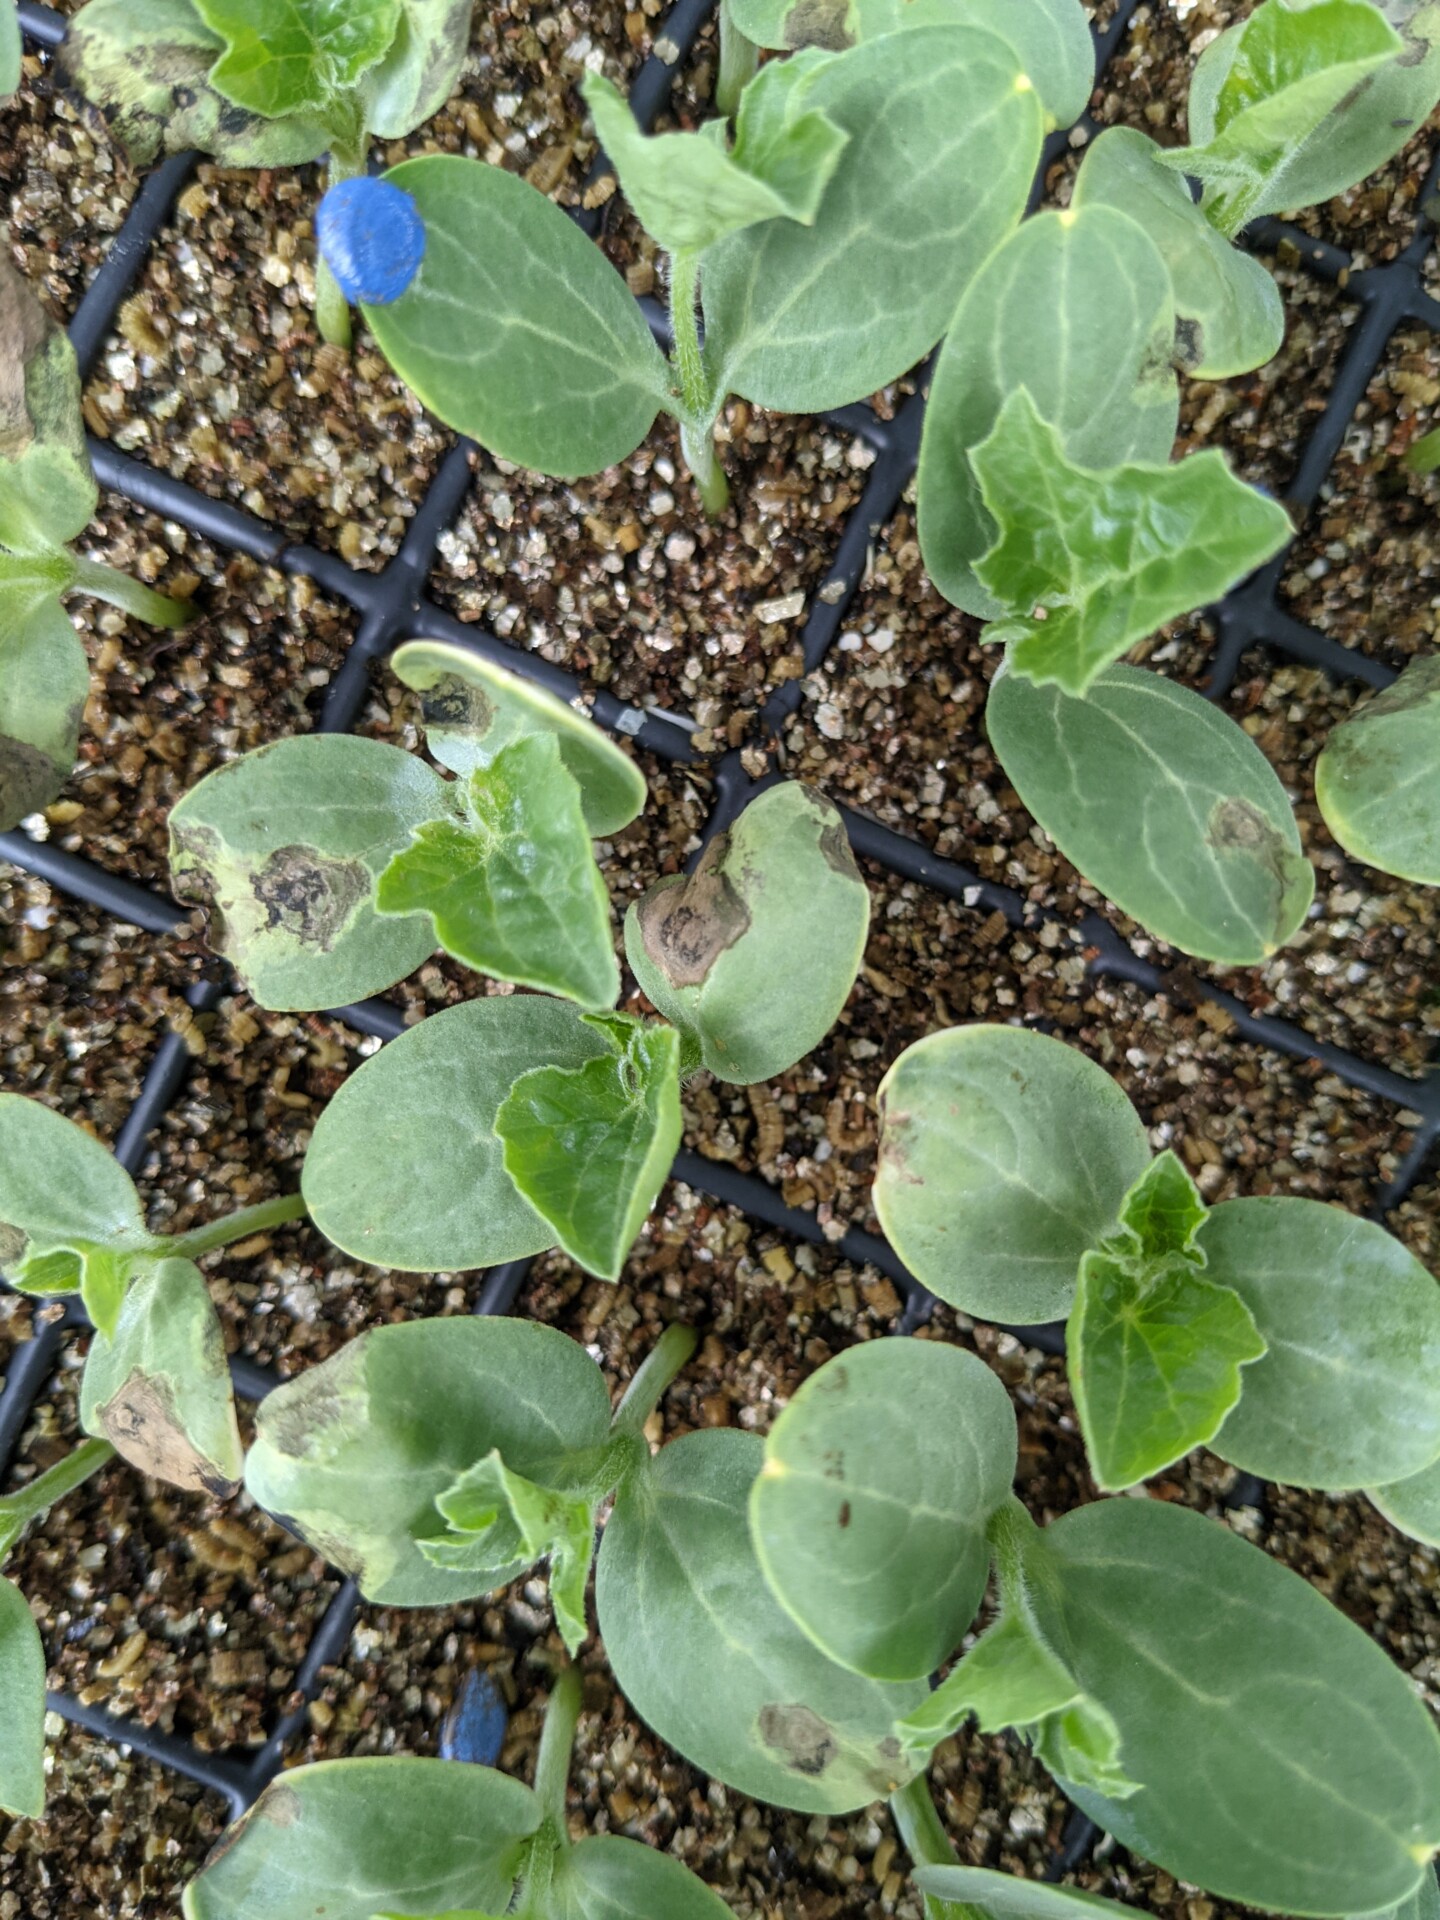 Several watermelon transplants have lesions of angular leaf spot.